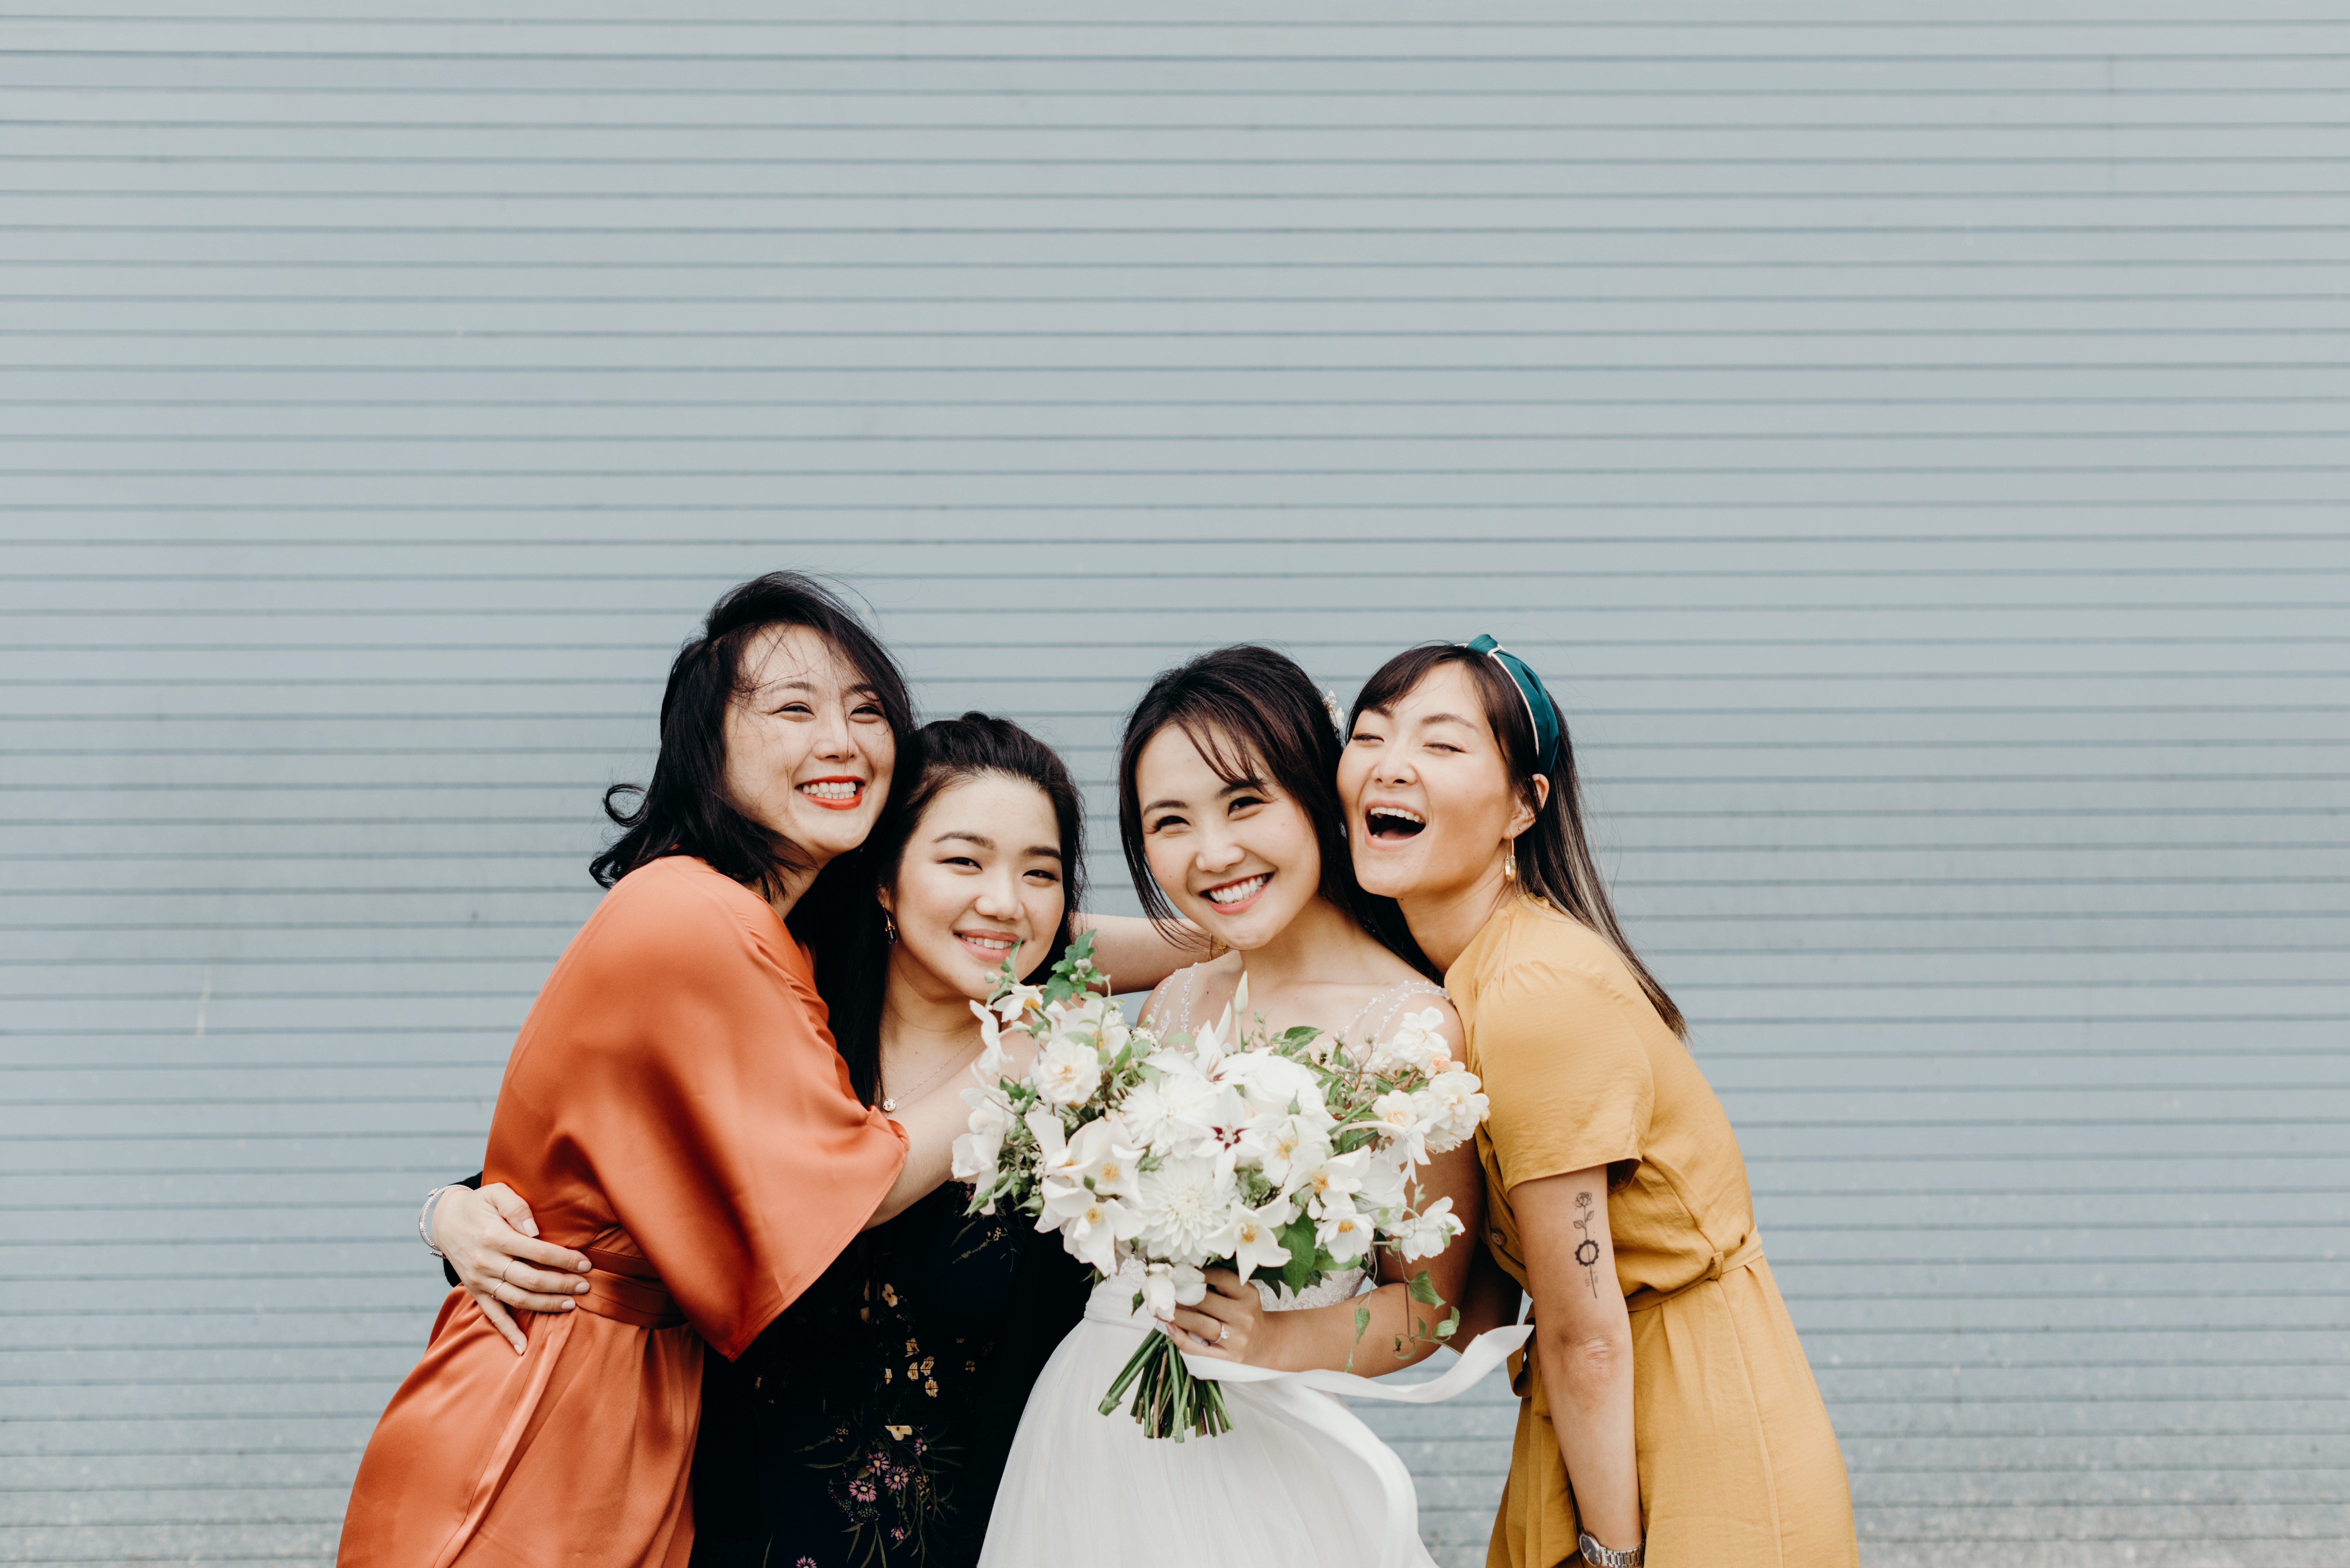 A bride and her ladies - choose helpers to give you the support you need on your wedding day. Photography by Briana Morrison in Portland, Oregon